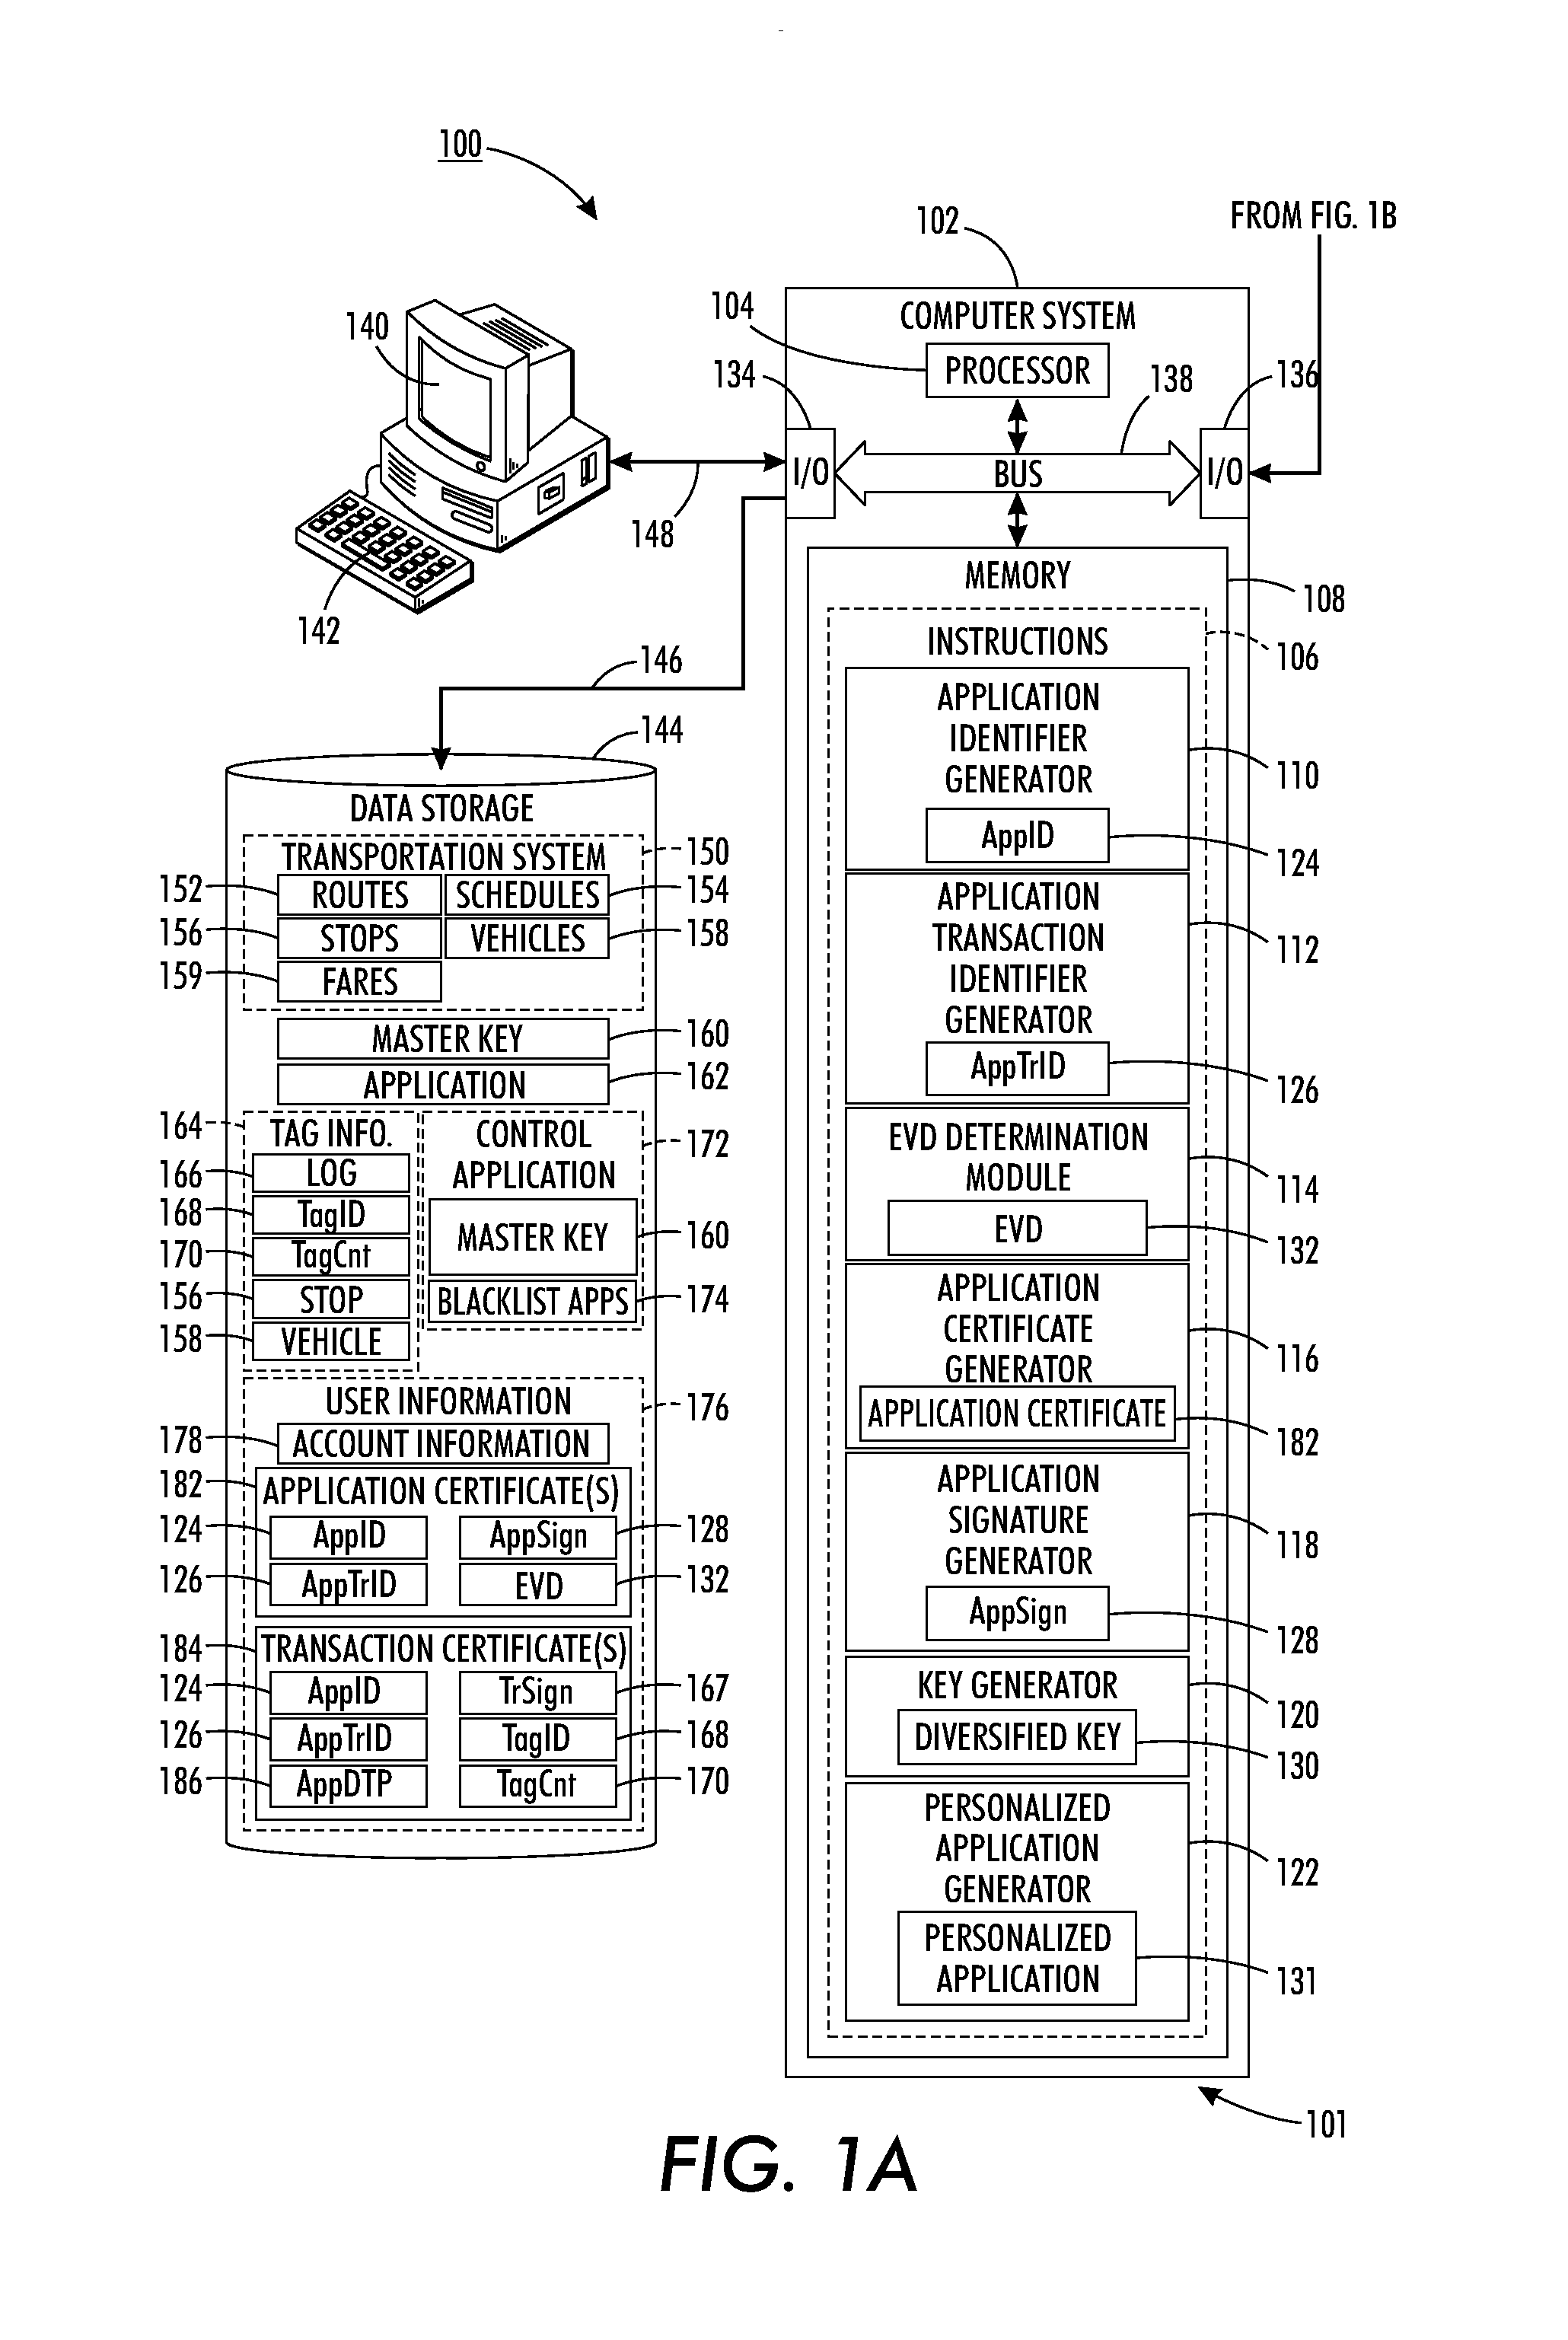 System and method for enabling transactions on an associated network